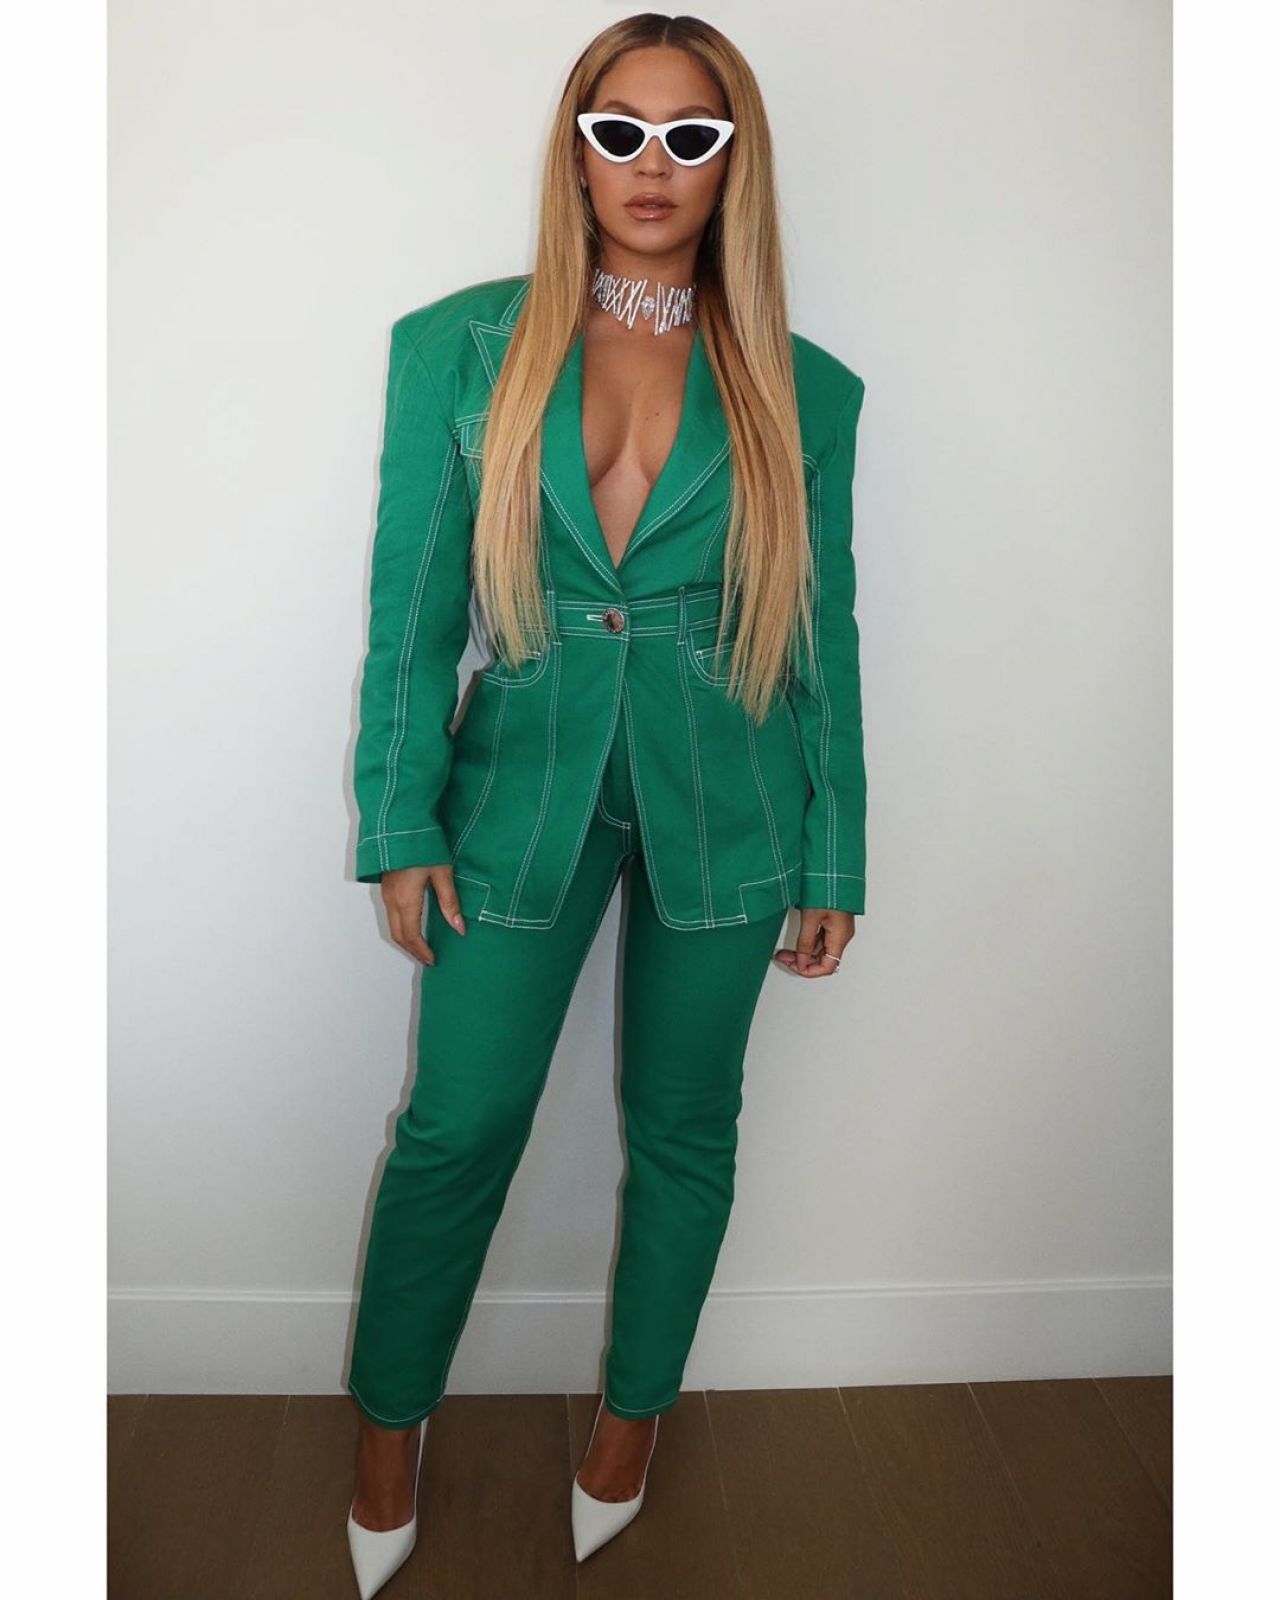 https://celebmafia.com/wp-content/uploads/2020/02/beyonce-knowles-outfit-social-media-02-03-2020-0.jpg